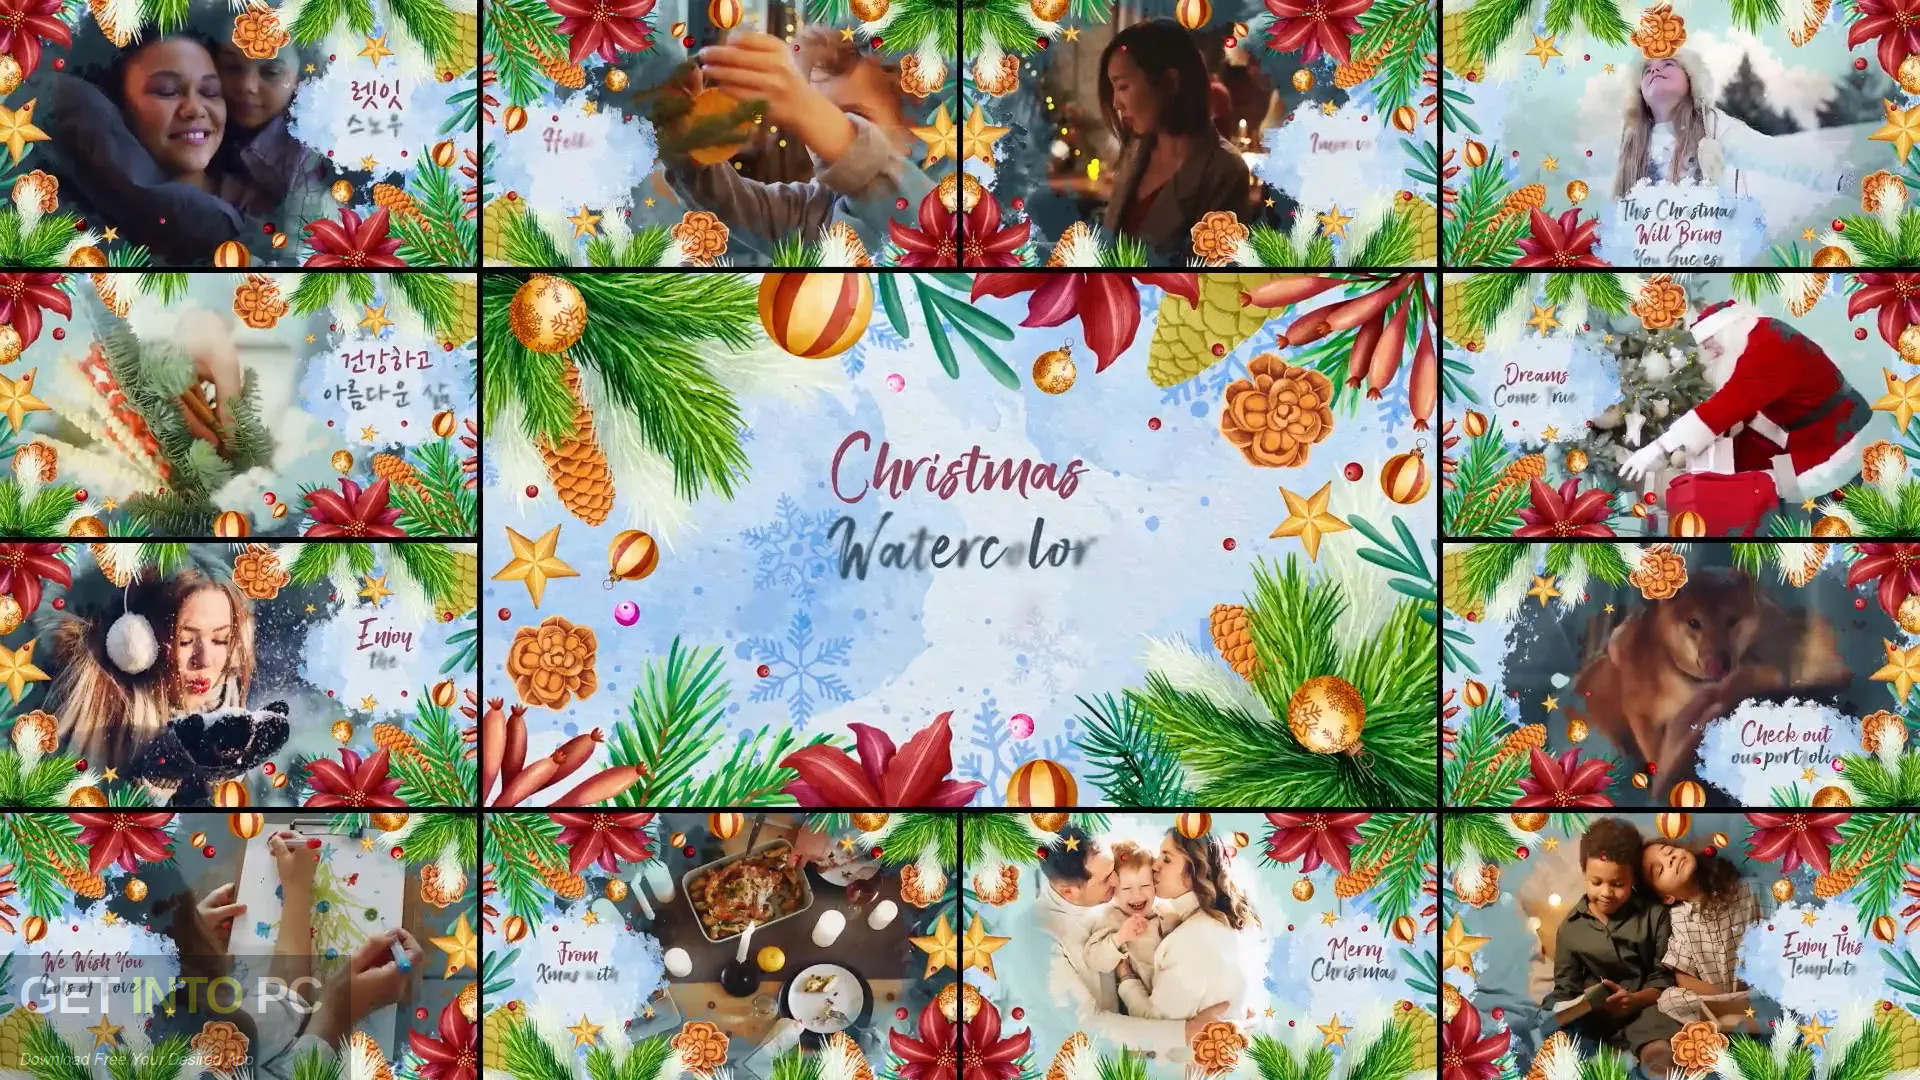 Download Christmas Watercolor Greeting Card for FCPX [MOTN] Free Download